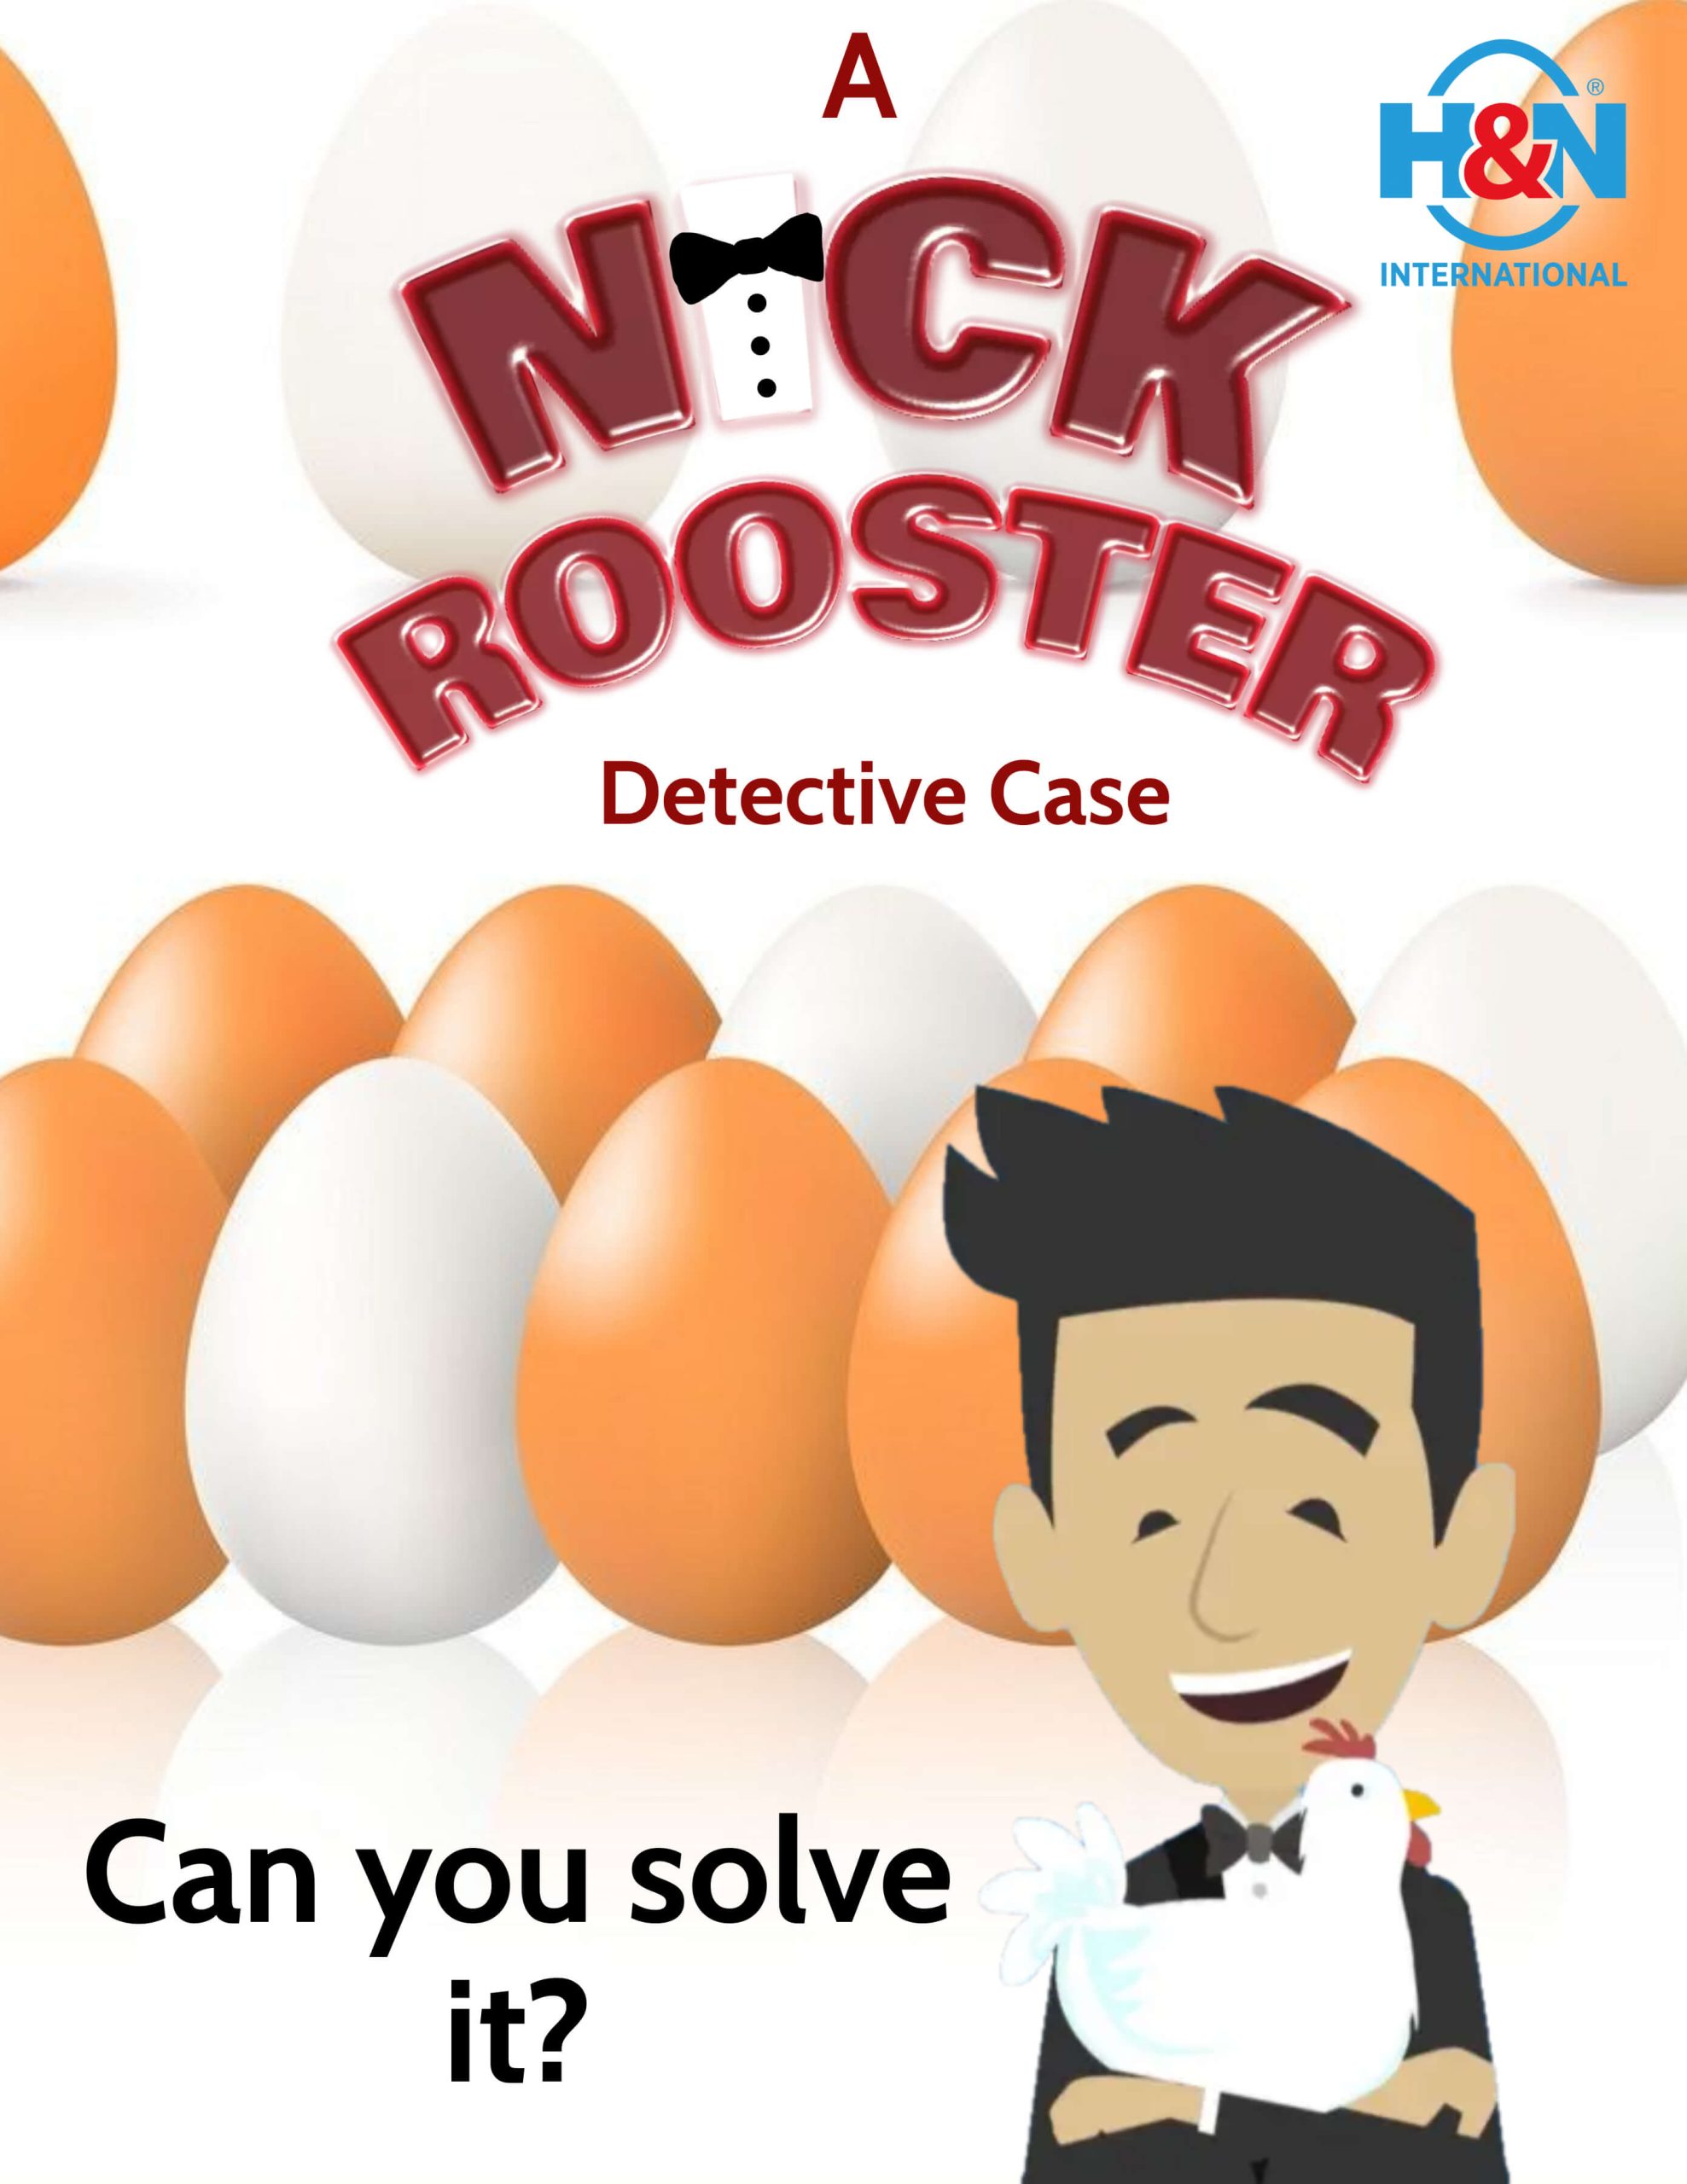 Nick Rooster case no. 14